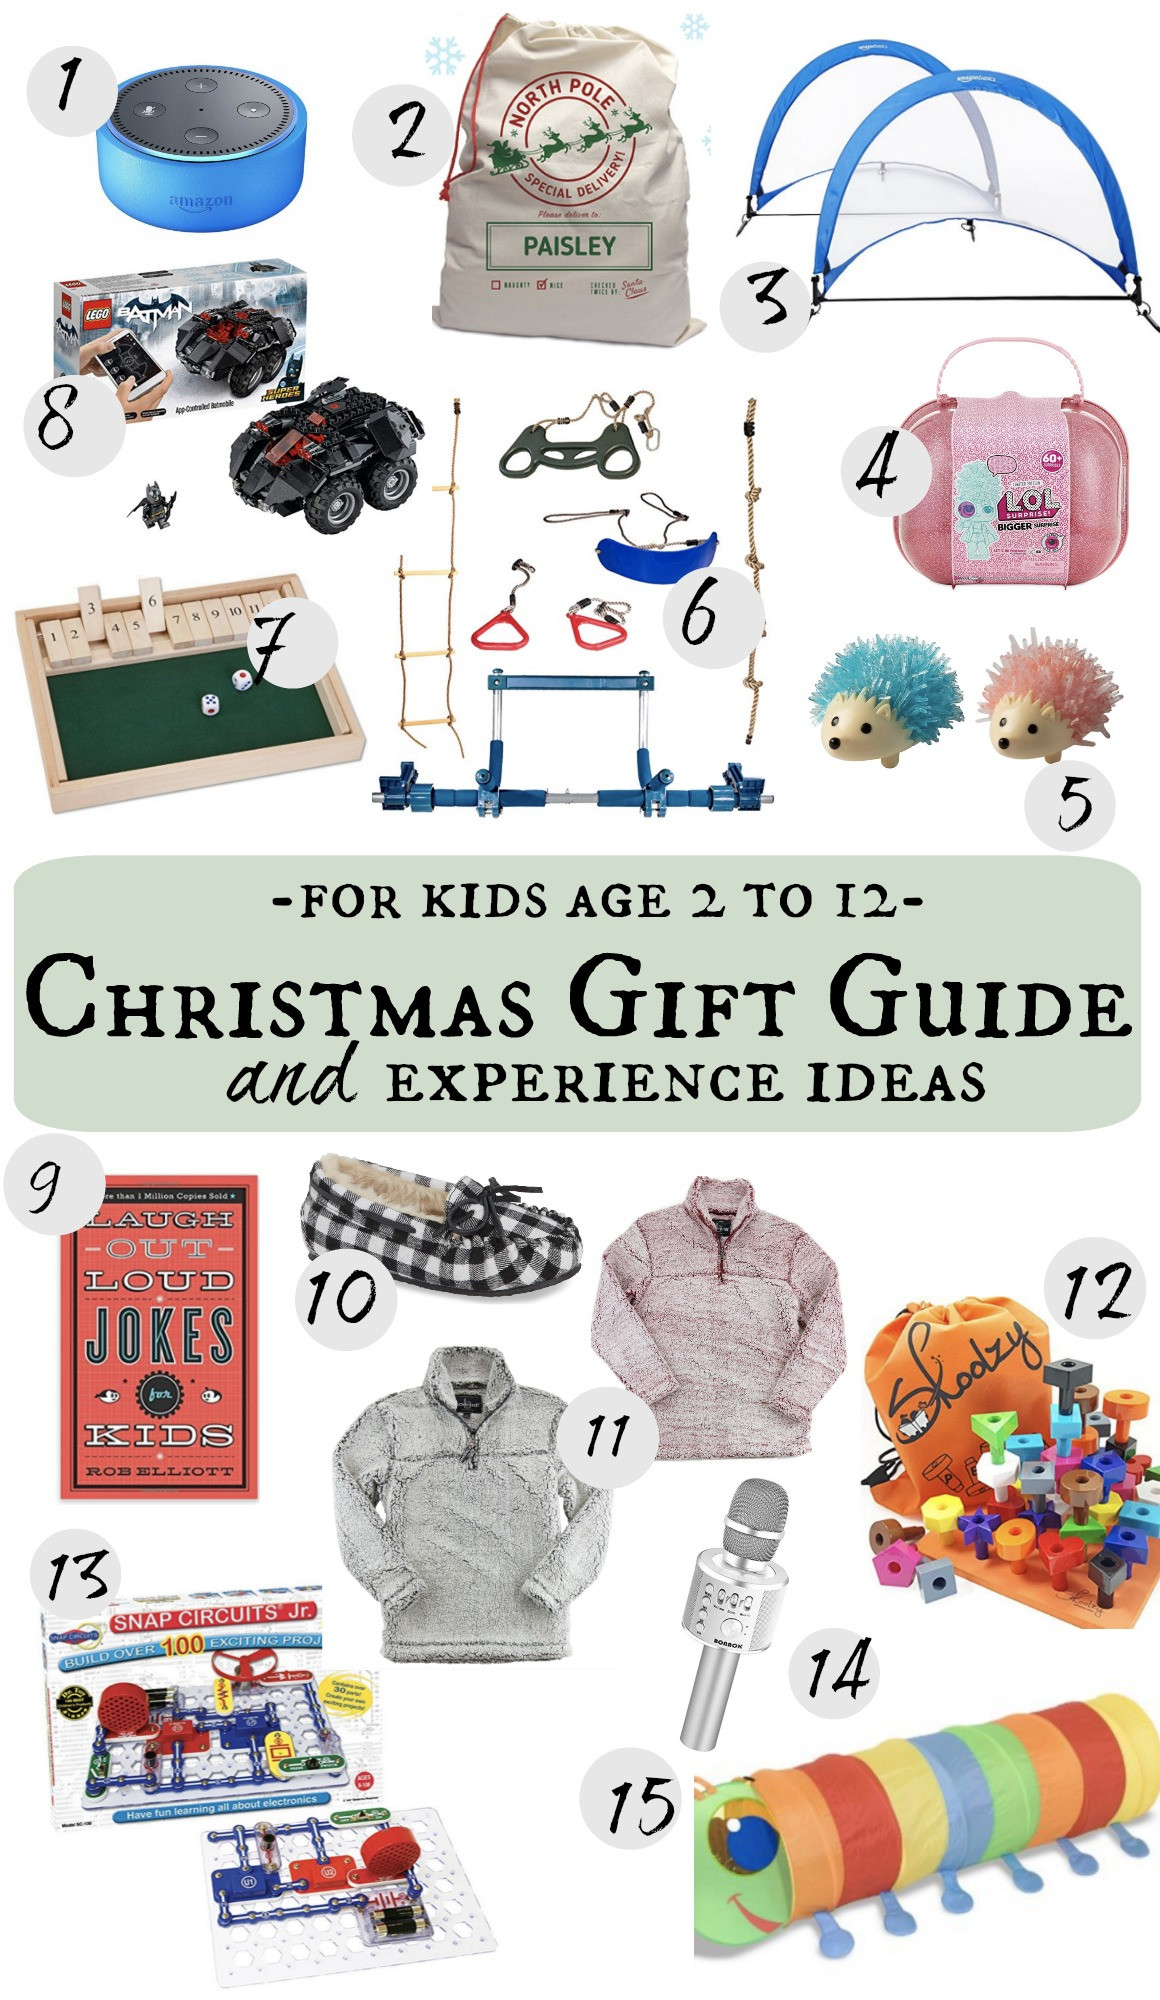 Christmas Gift Ideas From Kids
 Christmas Gift Guide for Kids with Experience Ideas too